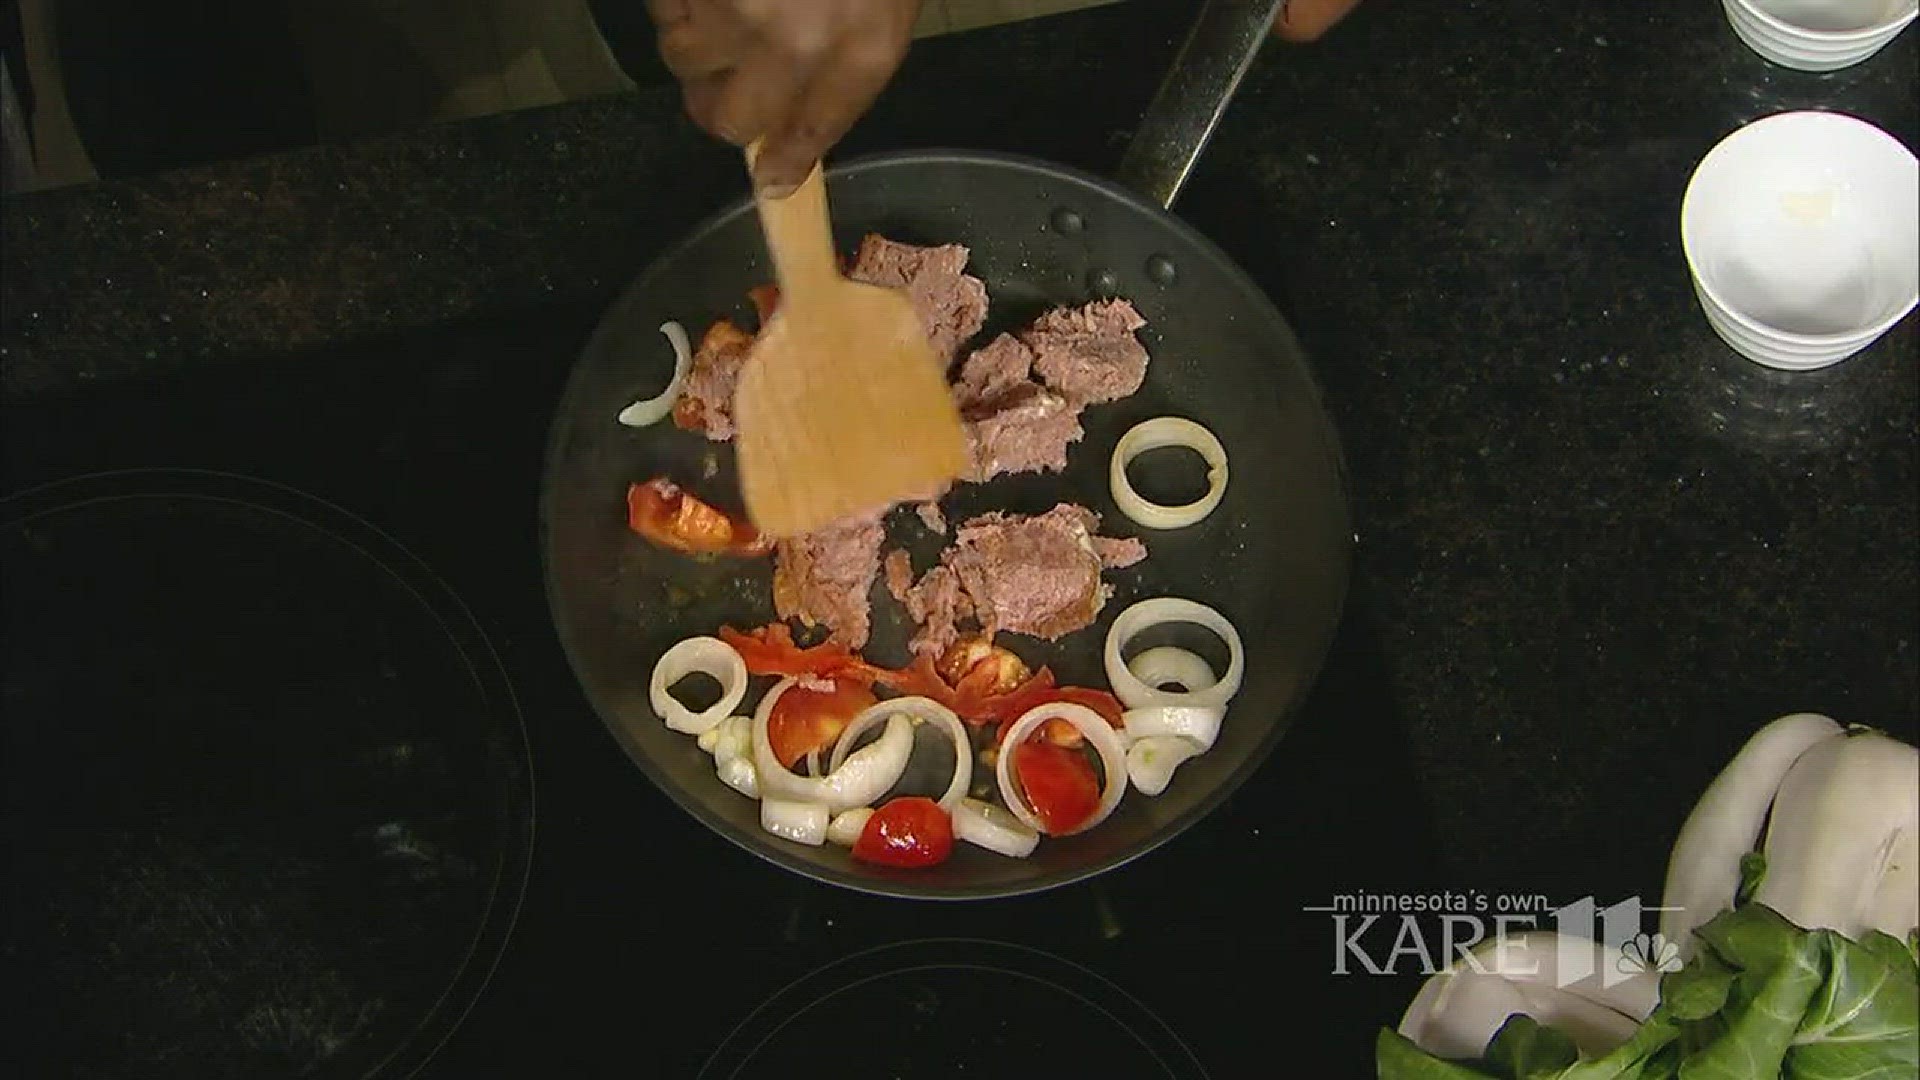 Tomme Beevas cooks us a corned beef dish from Pimento. This spread is a pick from Super Snack snacks. http://kare11.tv/2ibWeqf